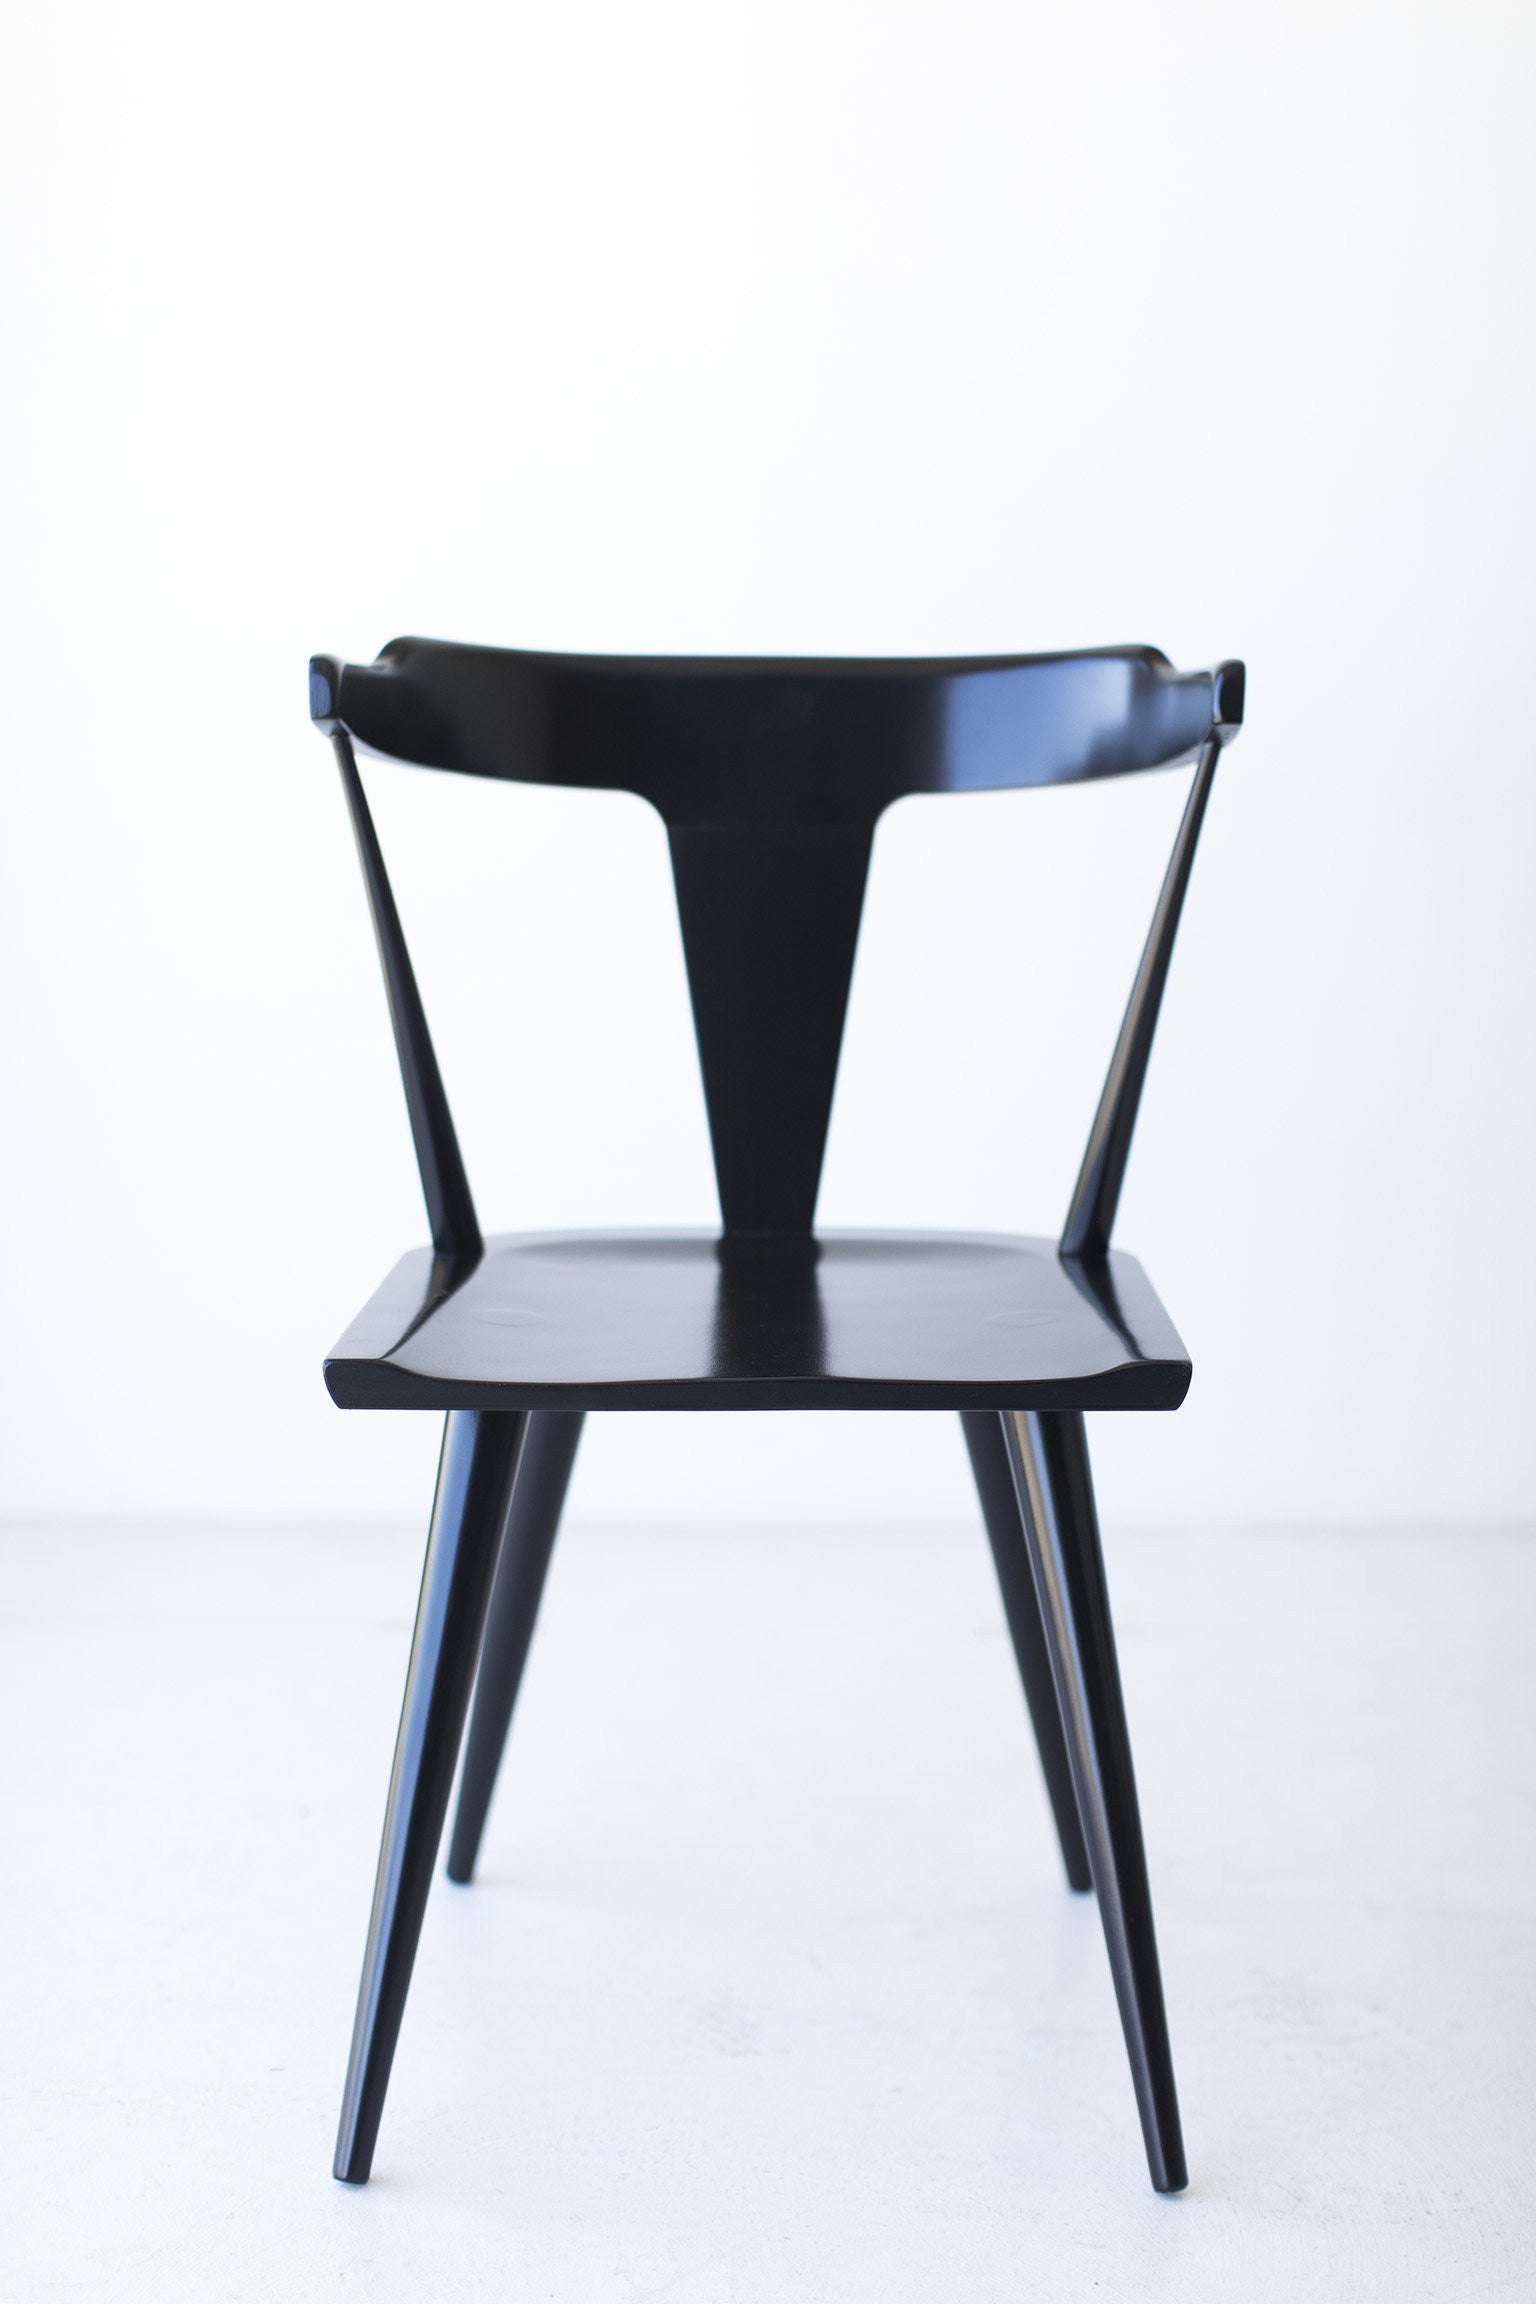 Paul McCobb Dining Chairs for Winchendon, Planner Group - 05191701